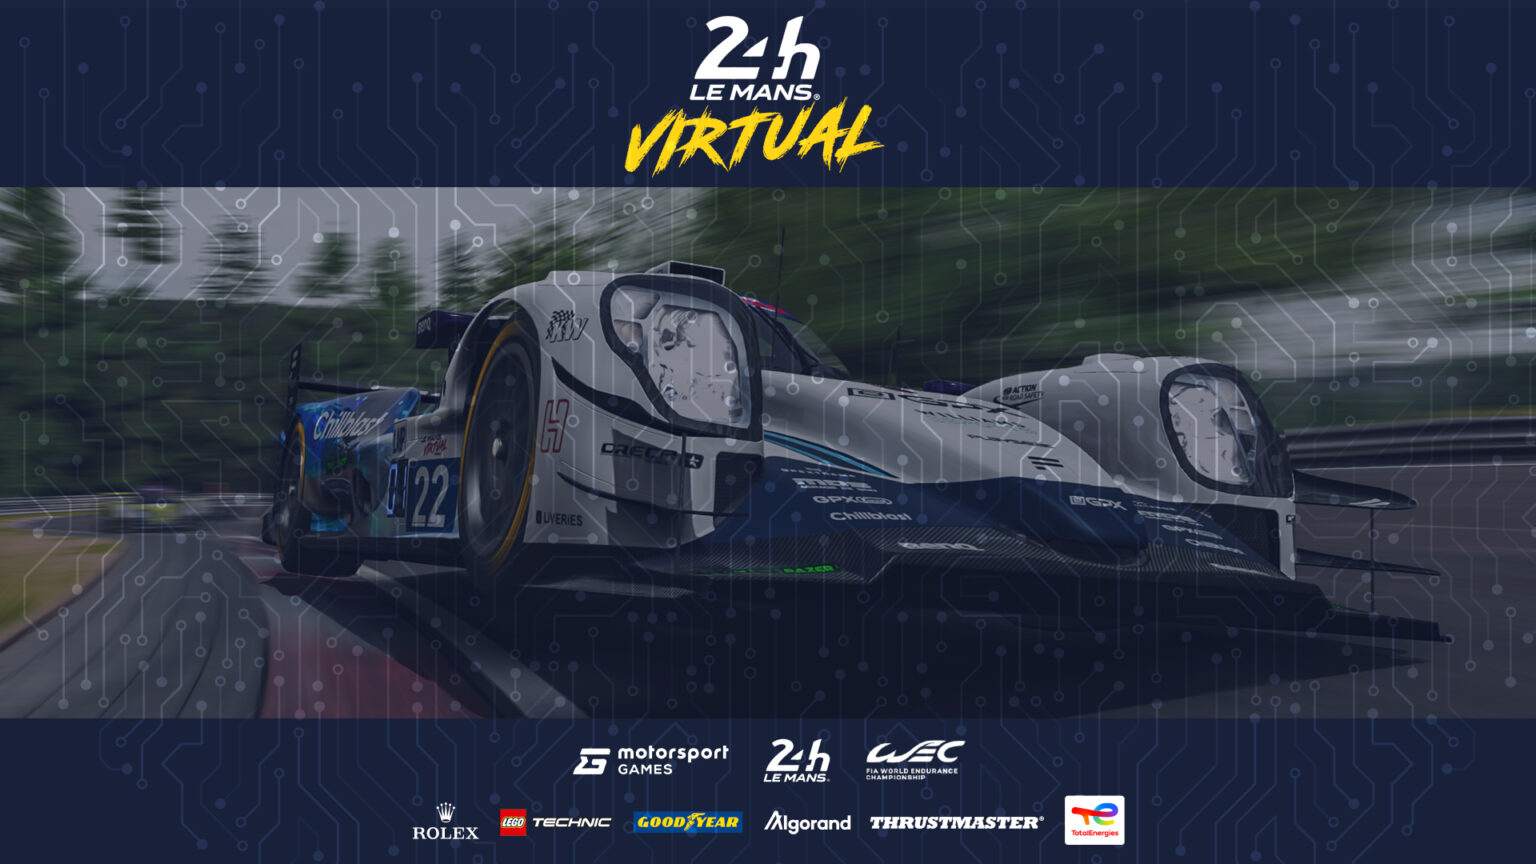 mercedes-amg-petronas-joins-red-bull-racing-for-debut-in-upcoming-24-hours-of-le-mans-virtual